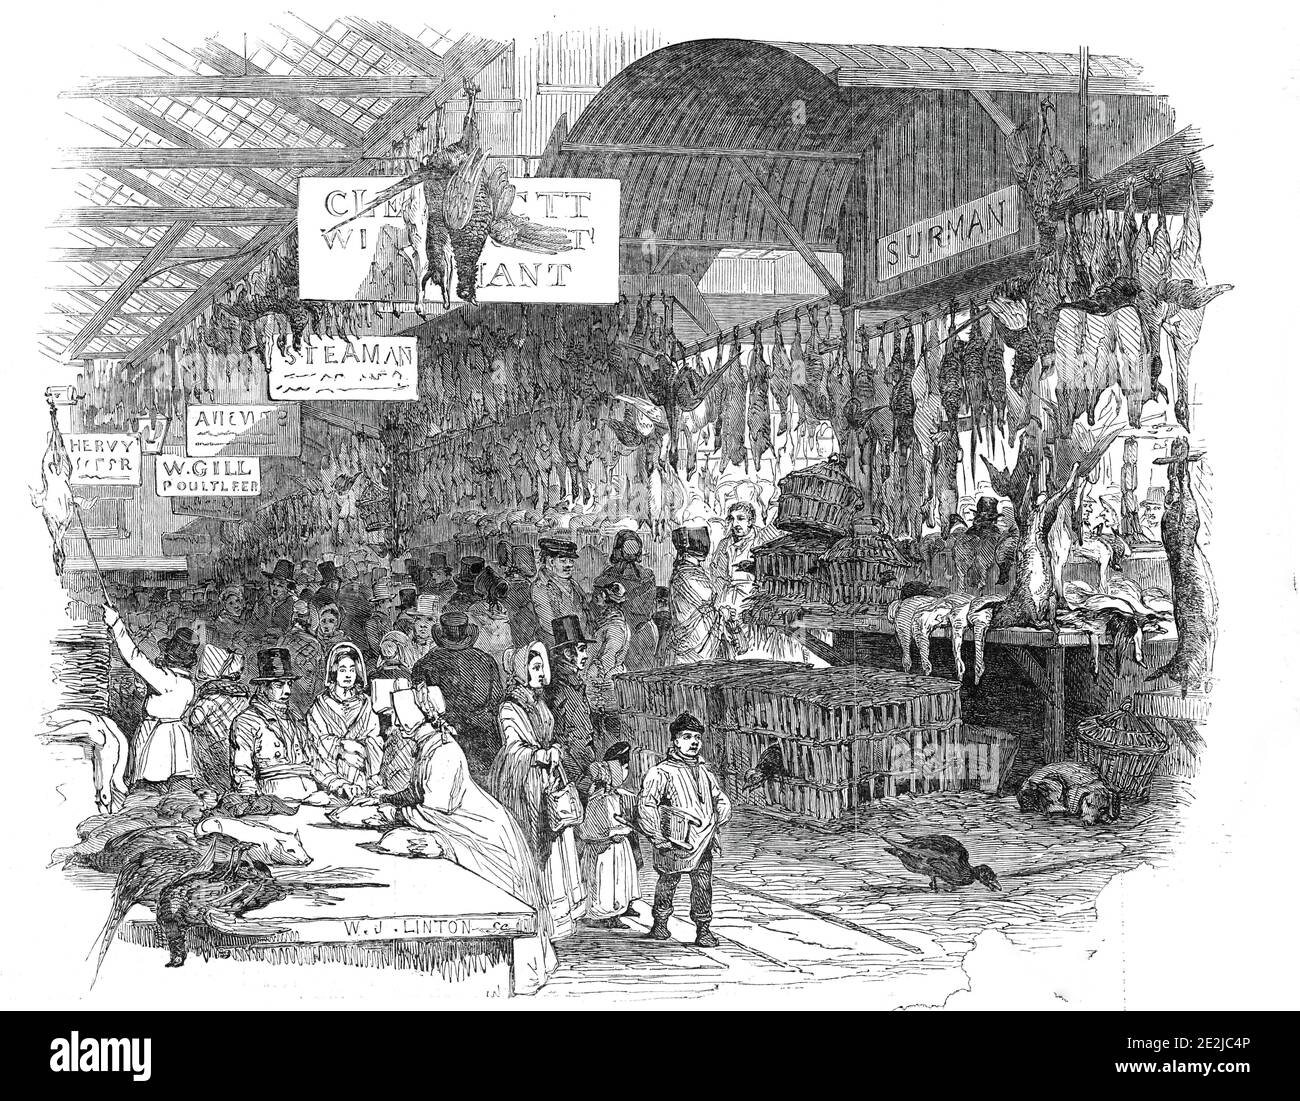 Leadenhall Market, on Christmas Eve, 1845. Meat and poultry for sale in the City of London. 'Leadenhall Market, the great place for poultry, game, and rabbits; the returns for which, in one year, equal half a million of money...It is related that Don Pedro de Ronquillo once said to Charles II., that he believed there to be more meat sold in Leadenhall Market alone in one week, than in all the kingdom of Spain in a year'. From &quot;Illustrated London News&quot;, 1845, Vol VII. Stock Photo